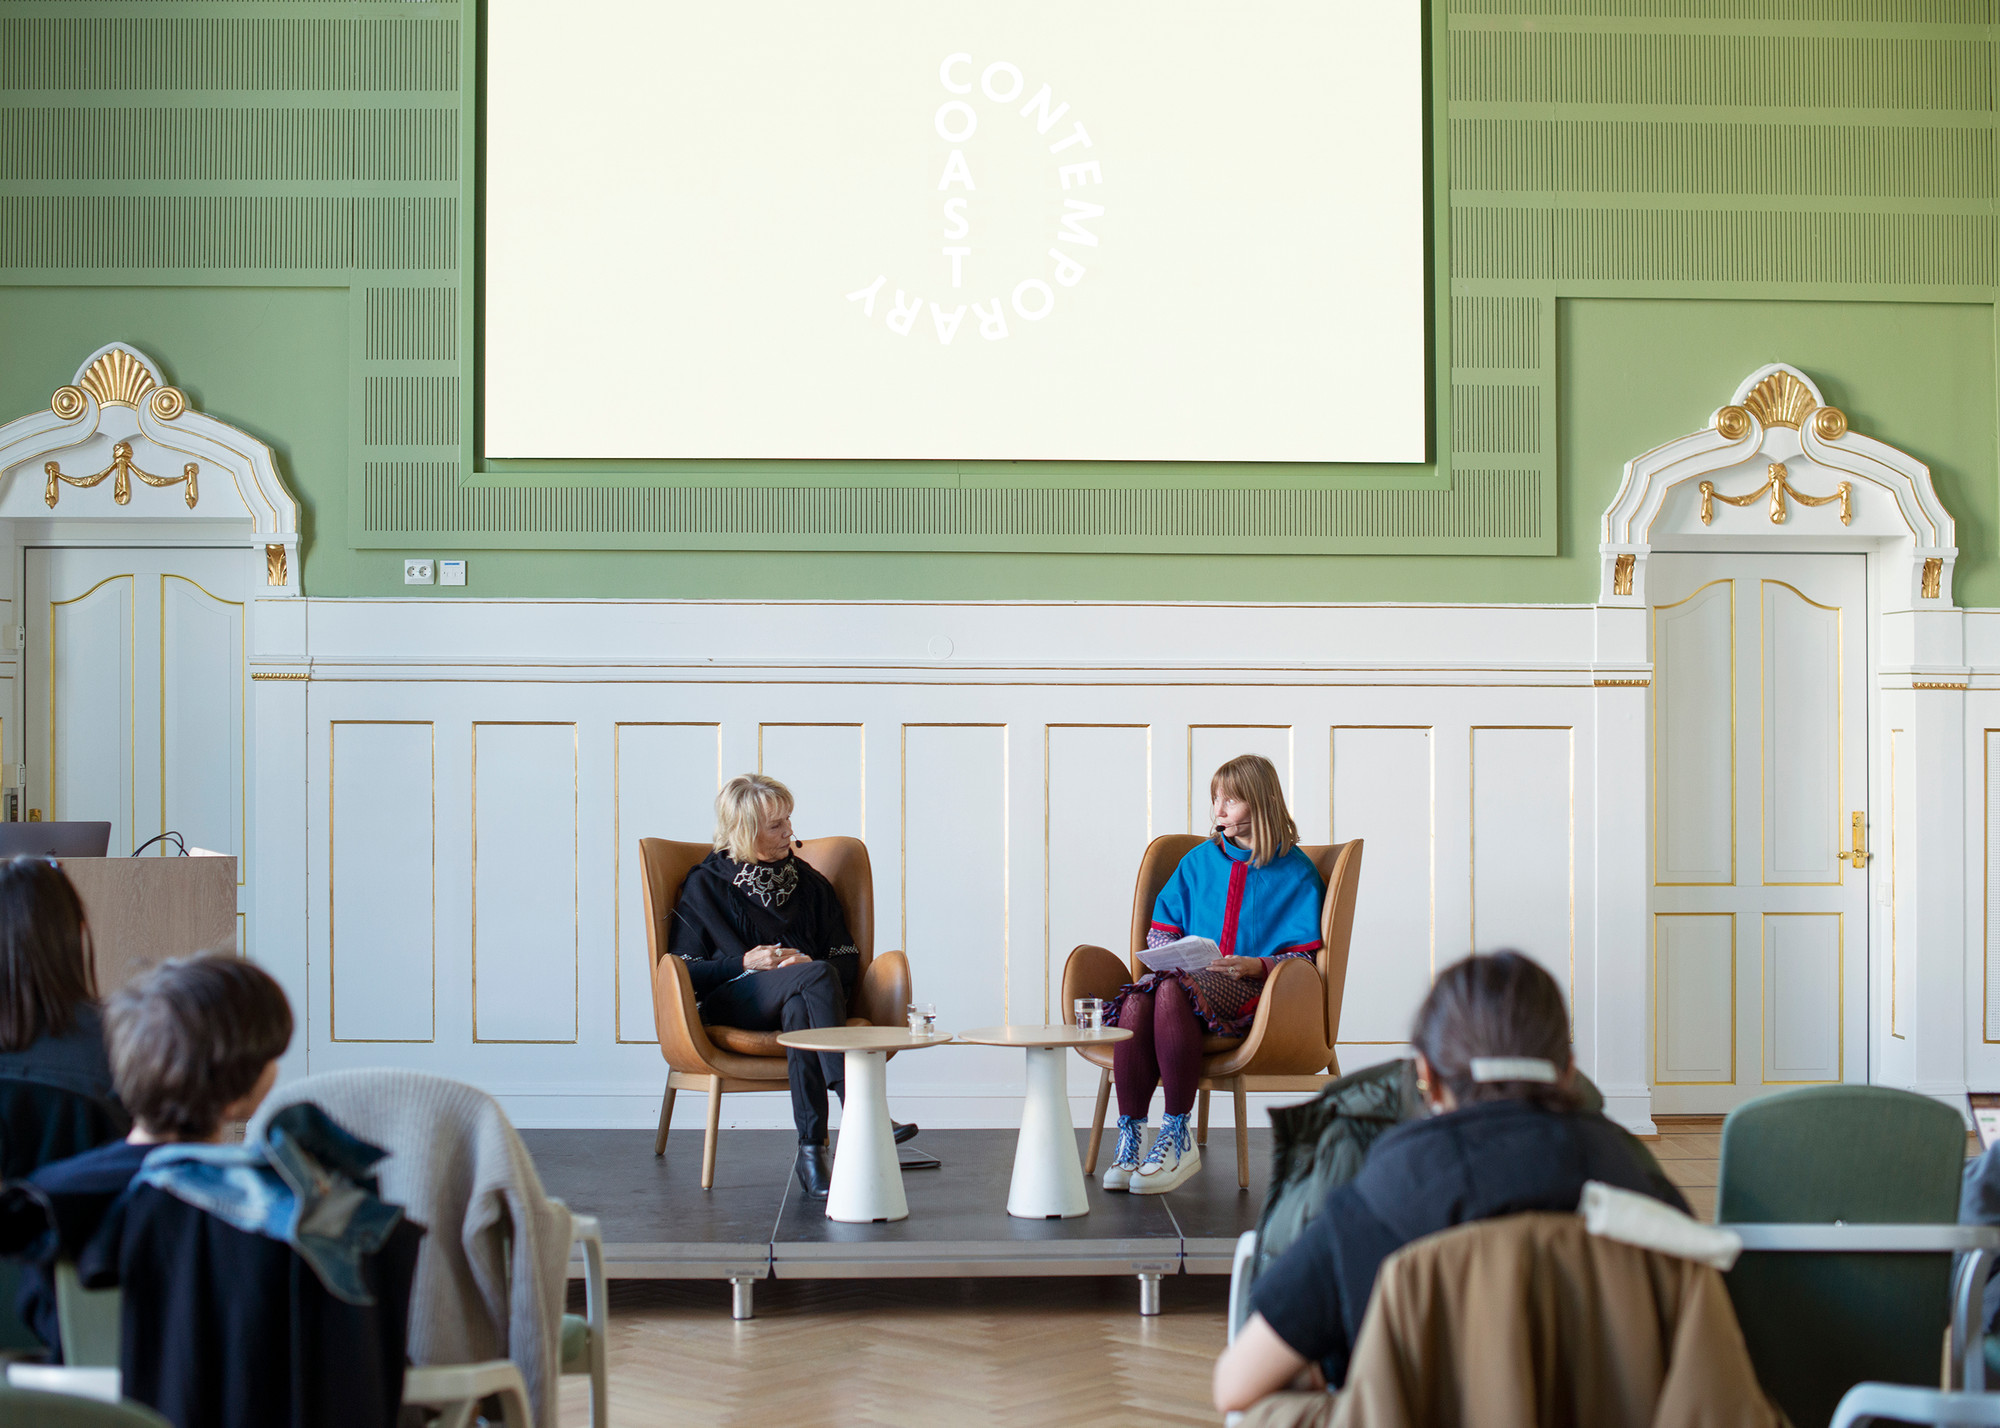 Conversation between Synnøve Persen and Lill Tove Fredriksen. Photo: Mihaly Stefanovicz